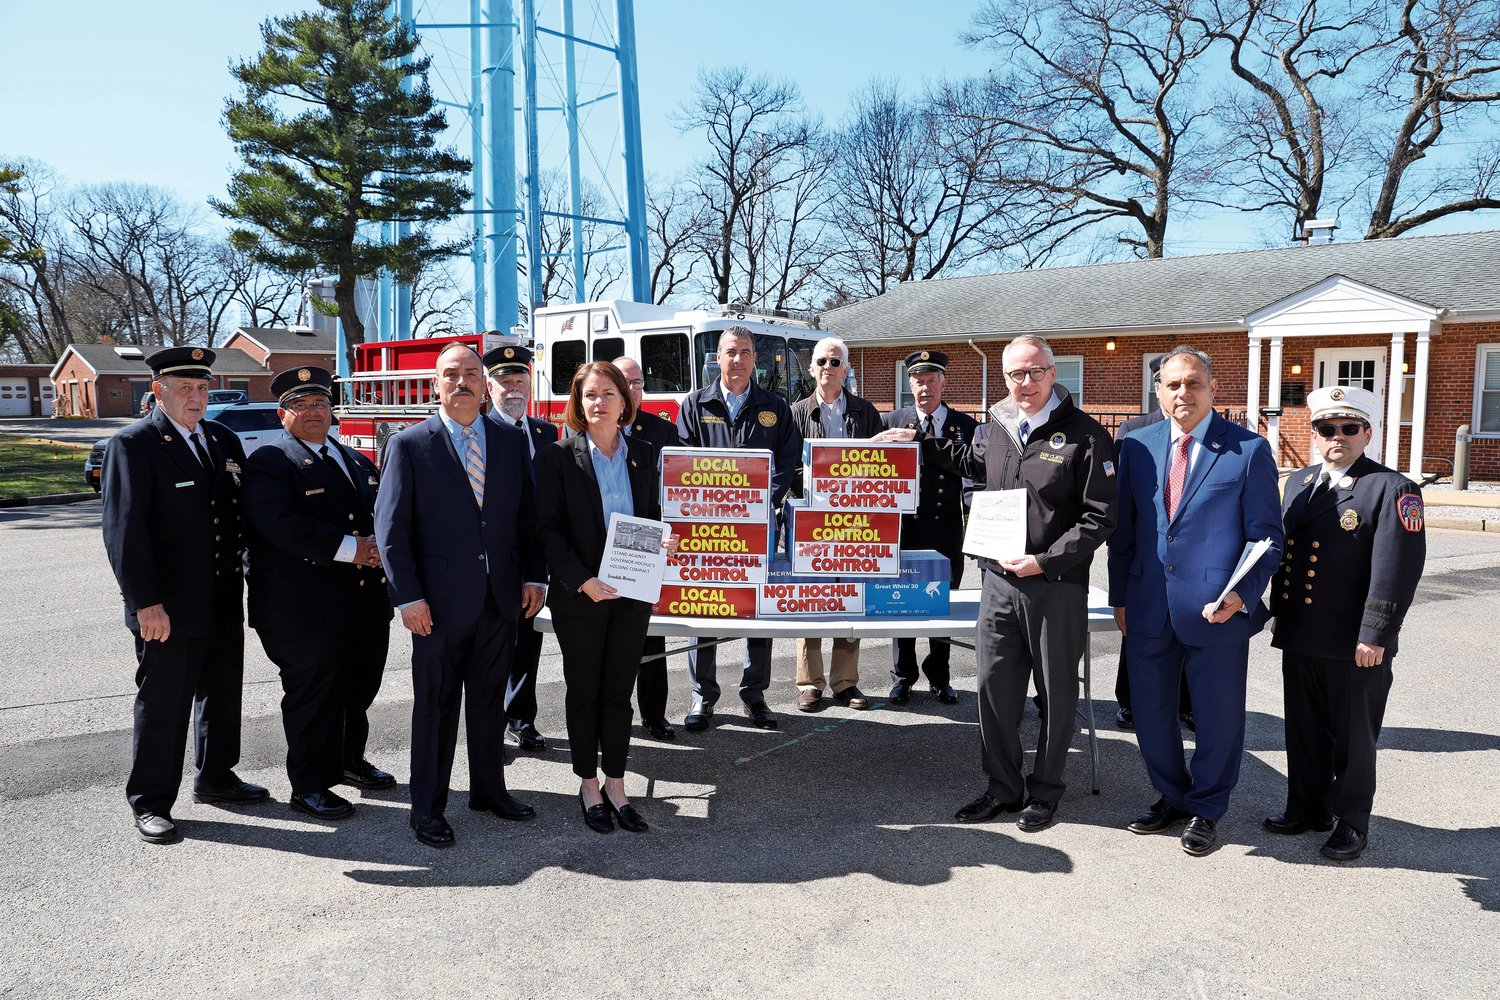 Hempstead Town Supervisor Don Clavin, North Hempstead Town Supervisor Jen DeSena, Oyster Bay Town Supervisor Joseph Saladino and the Albertson Fire Department surround the more than 30,000 names in opposition to Governor Hochul’s Housing Compact at the Albertson Water District.